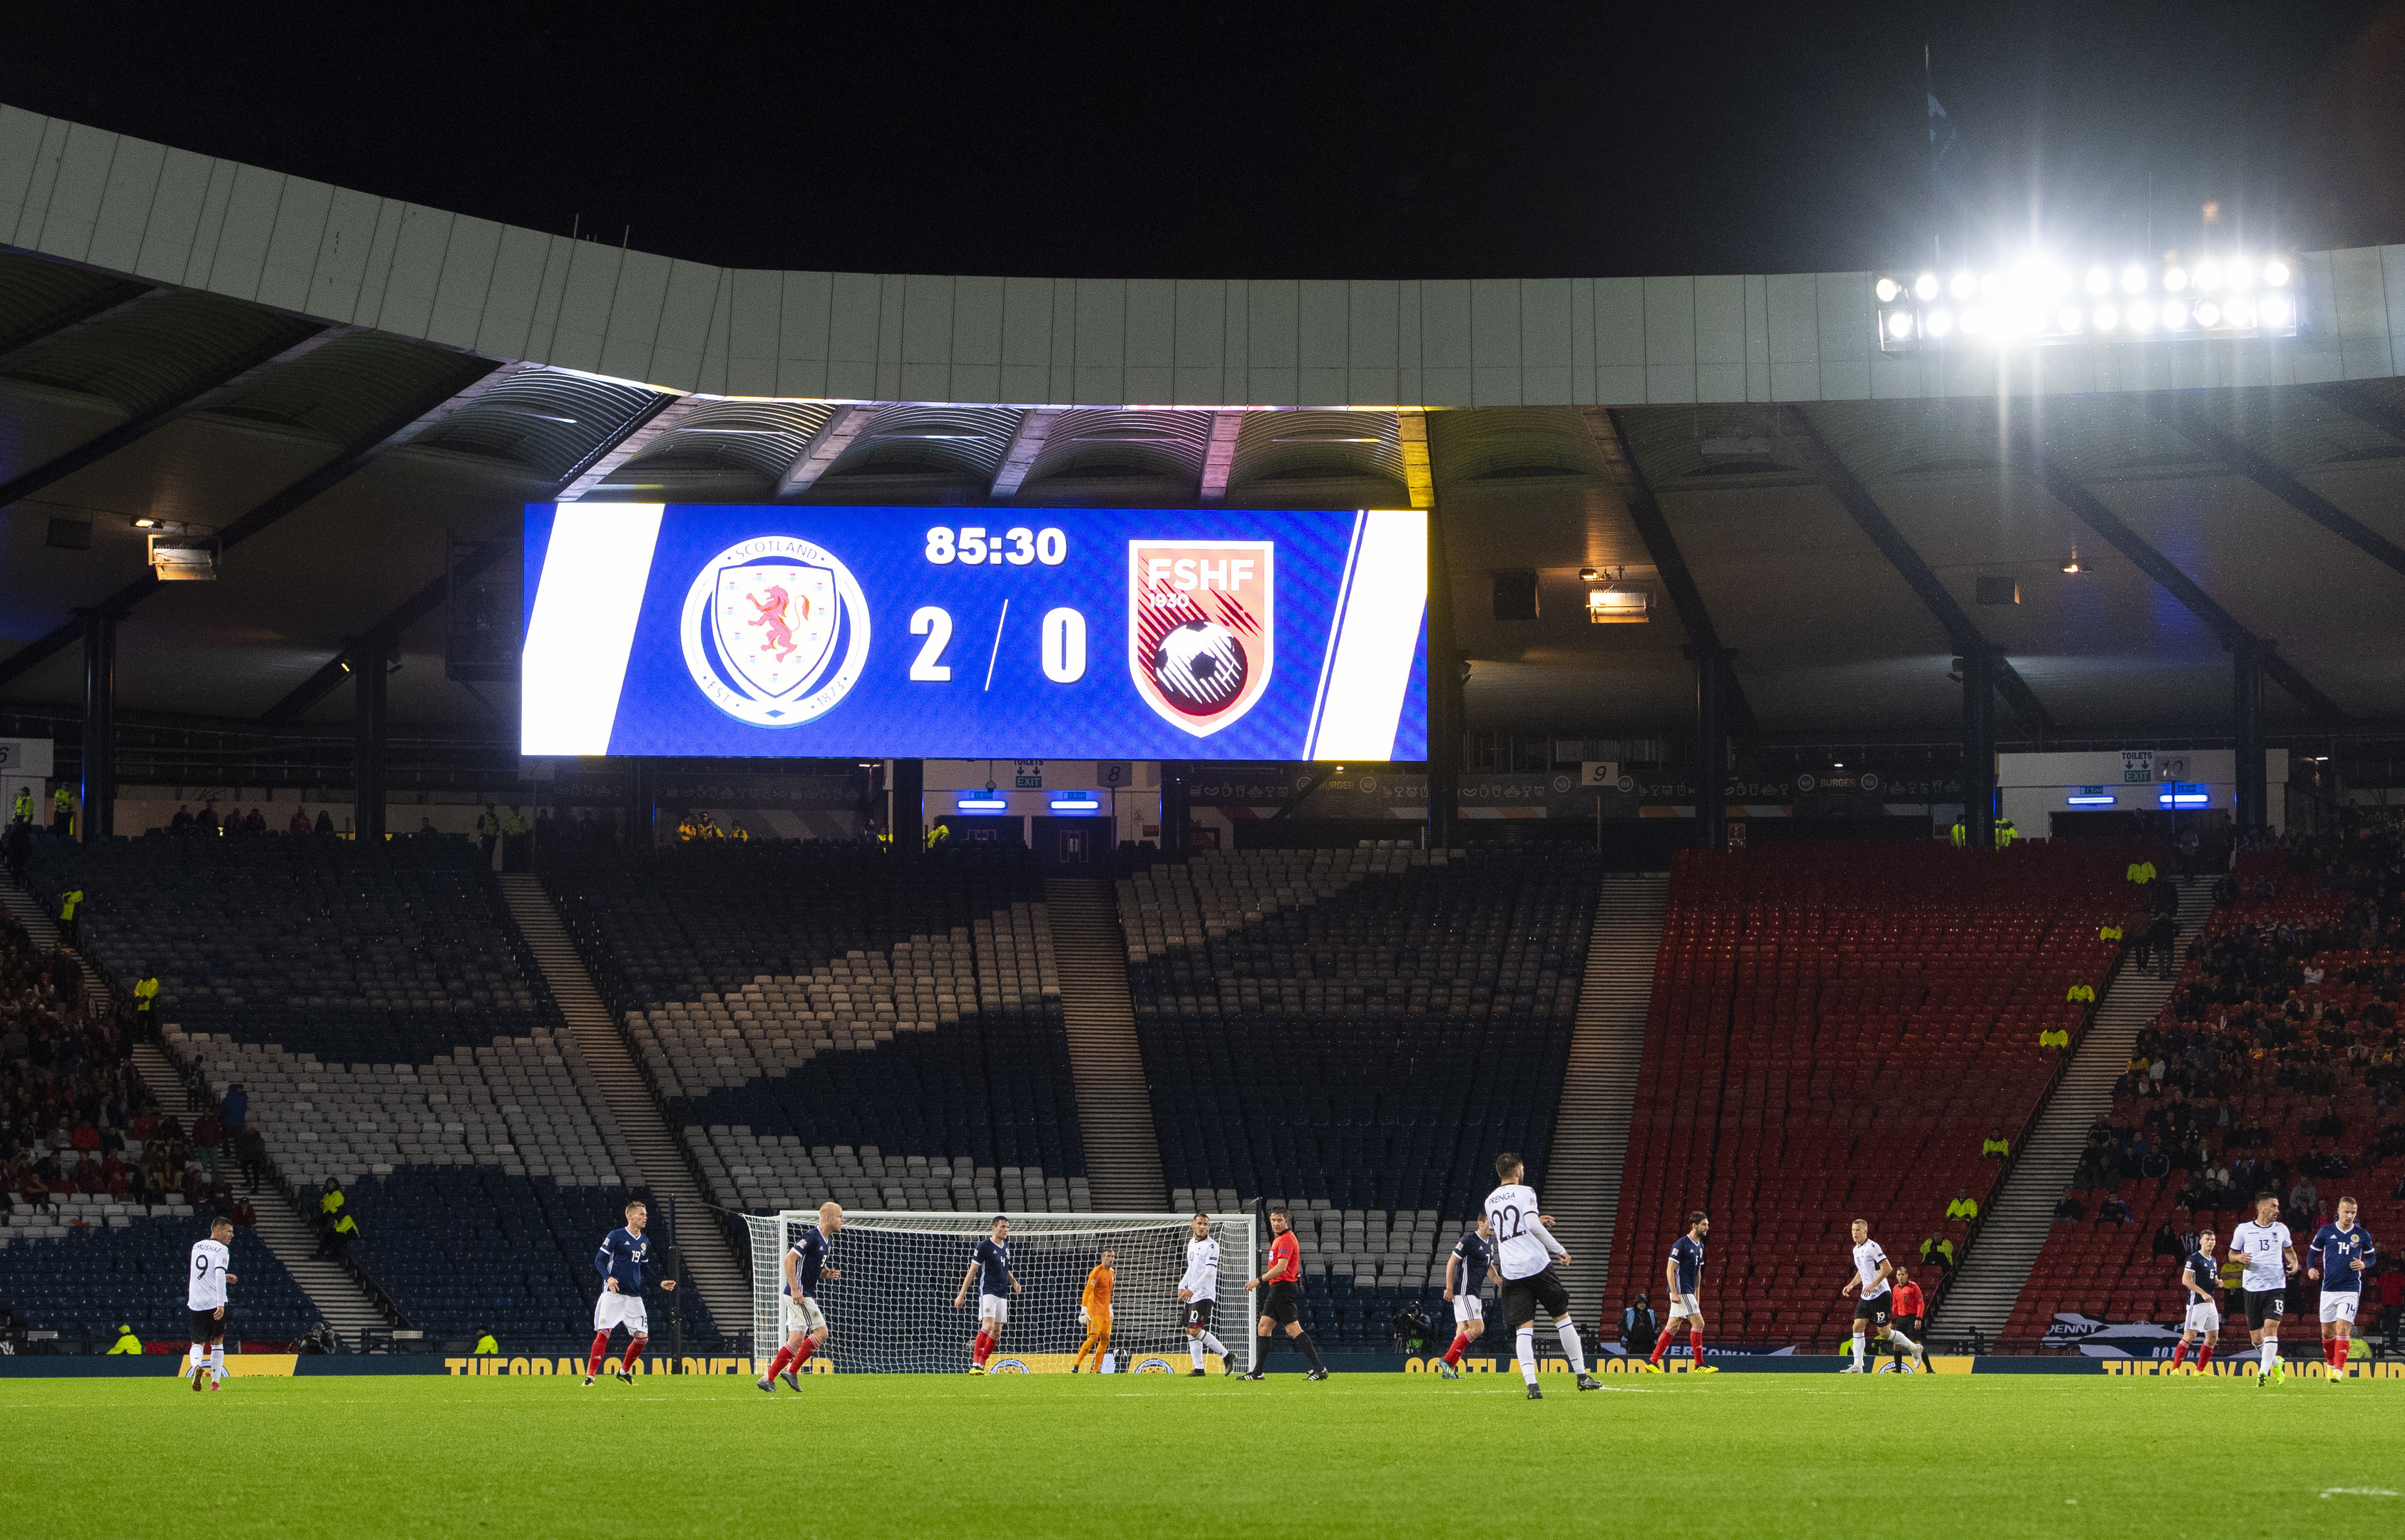 Hampden Park hosted Nations League games between Scotland, Israel and Albania last time around.